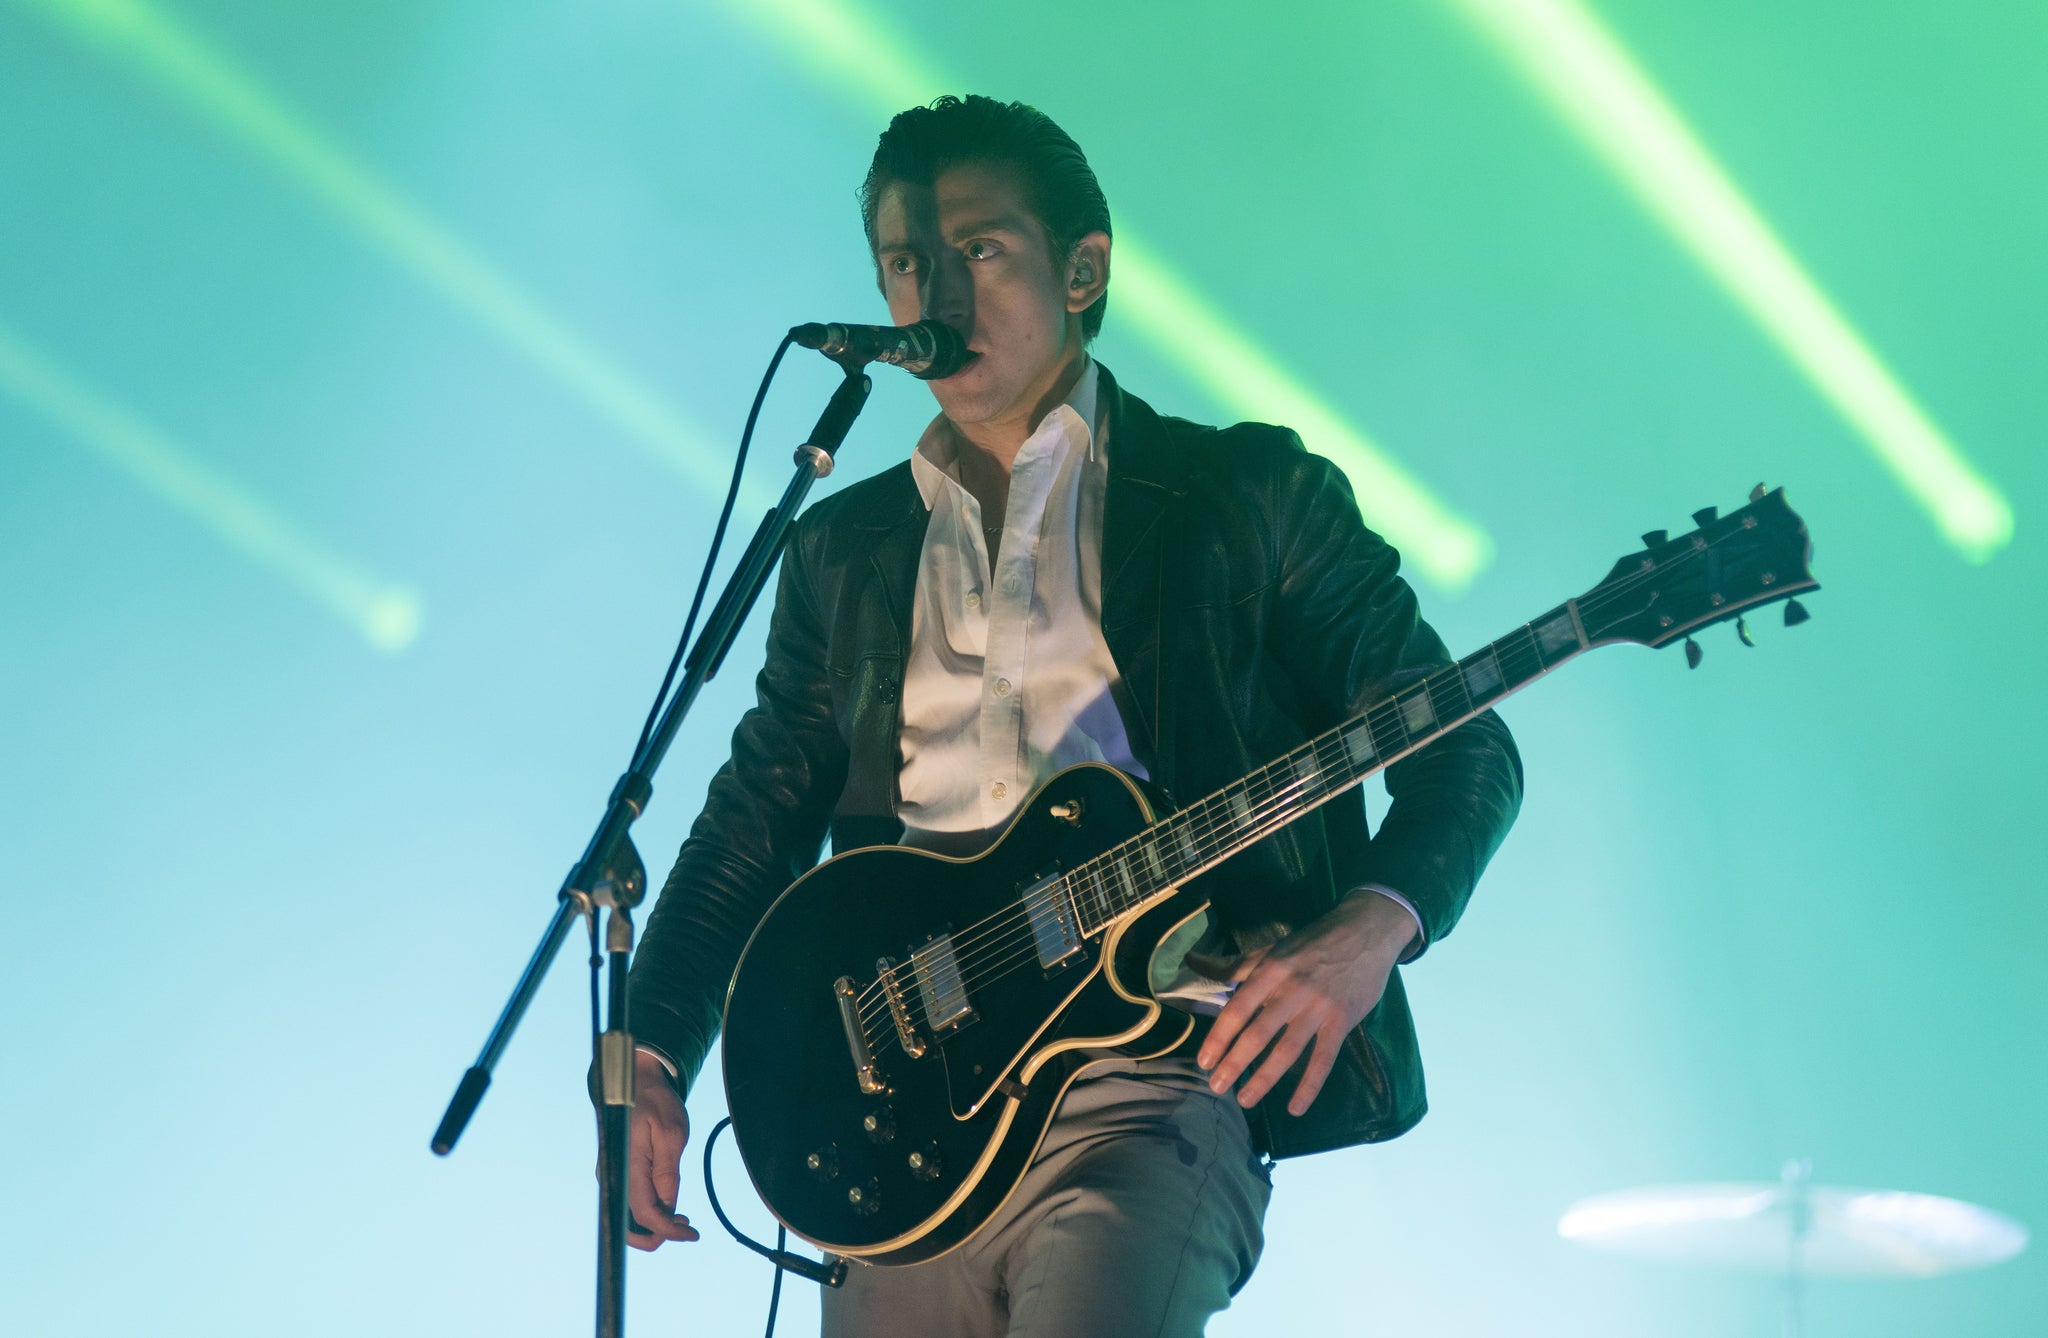 Arctic Monkeys played at Reading Festival but Alex Turner’s new-found suave attitude feels somewhat forced and distant, Giles Bidder says